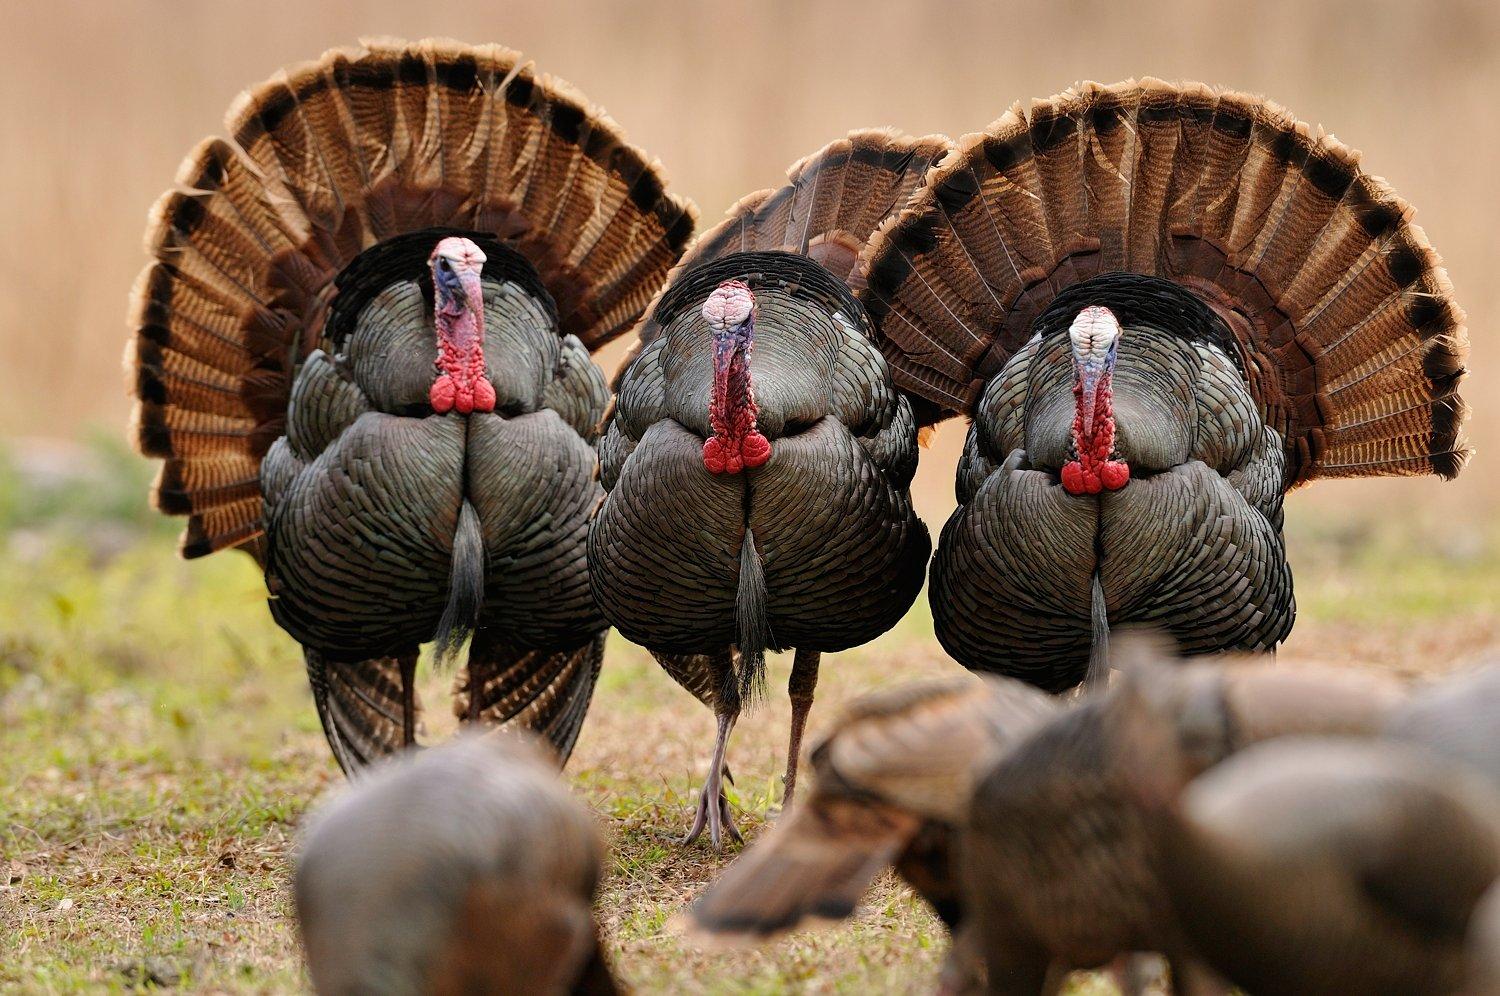 Pandemic, shelter-in-place advice kept some of us turkey hunters close to home this year. (© Tes Randle Jolly photo)